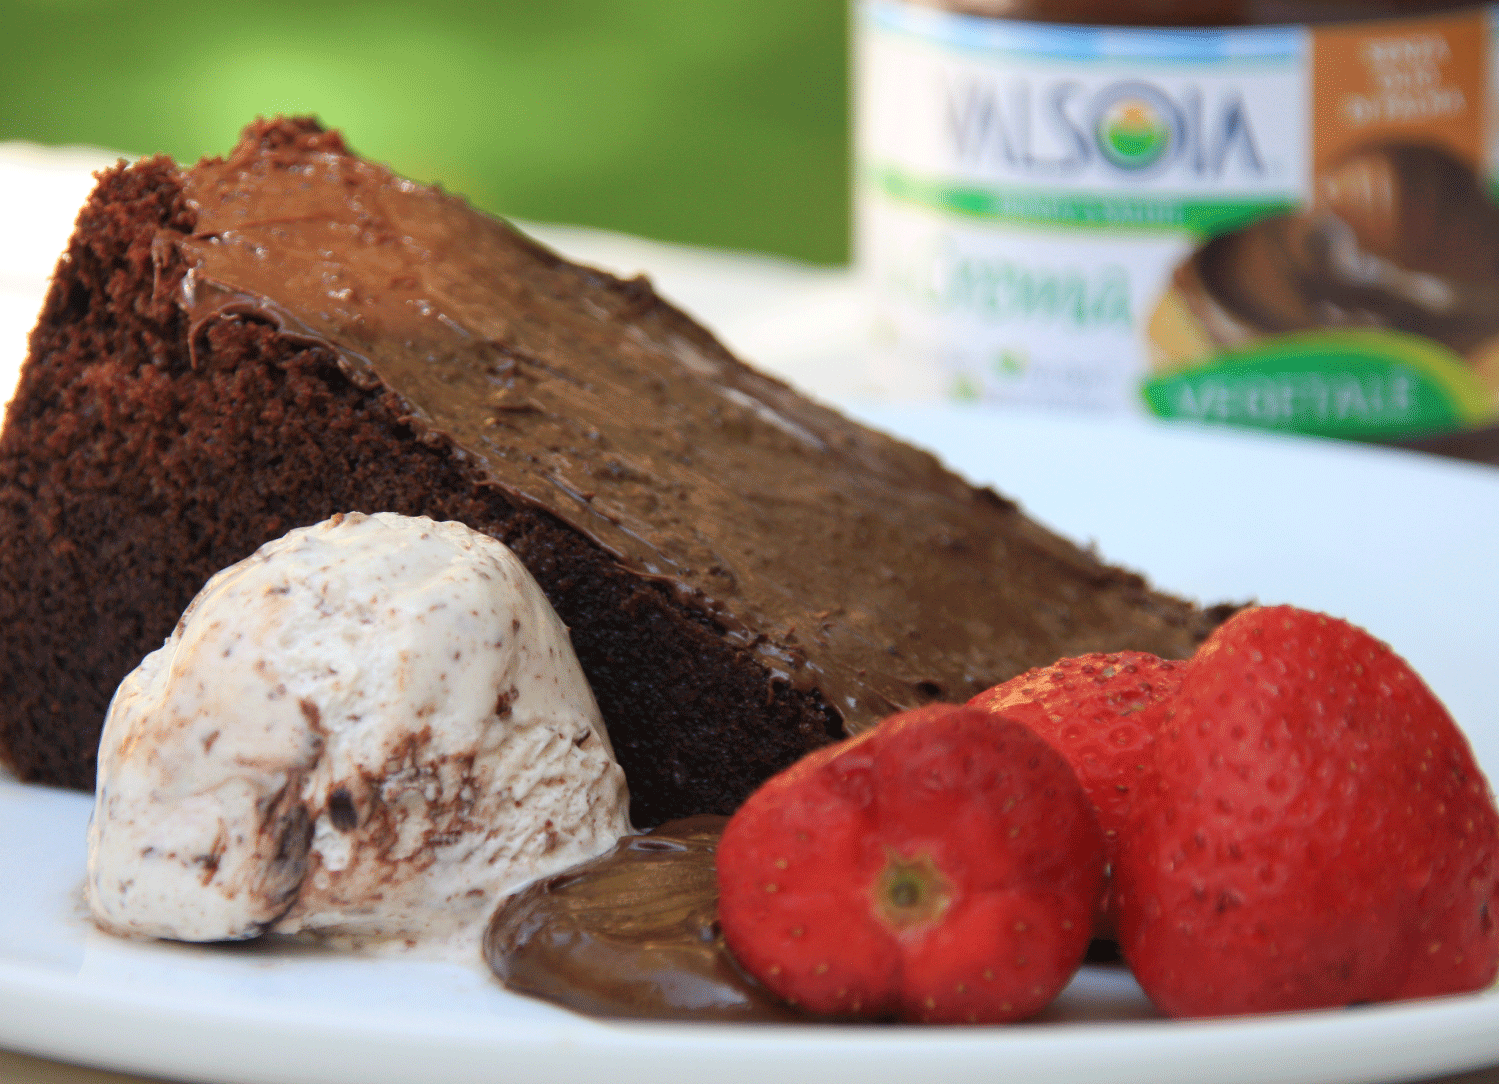 valsoia-hazelnut-spread-with-chocolate-cake-and-strawberries-main